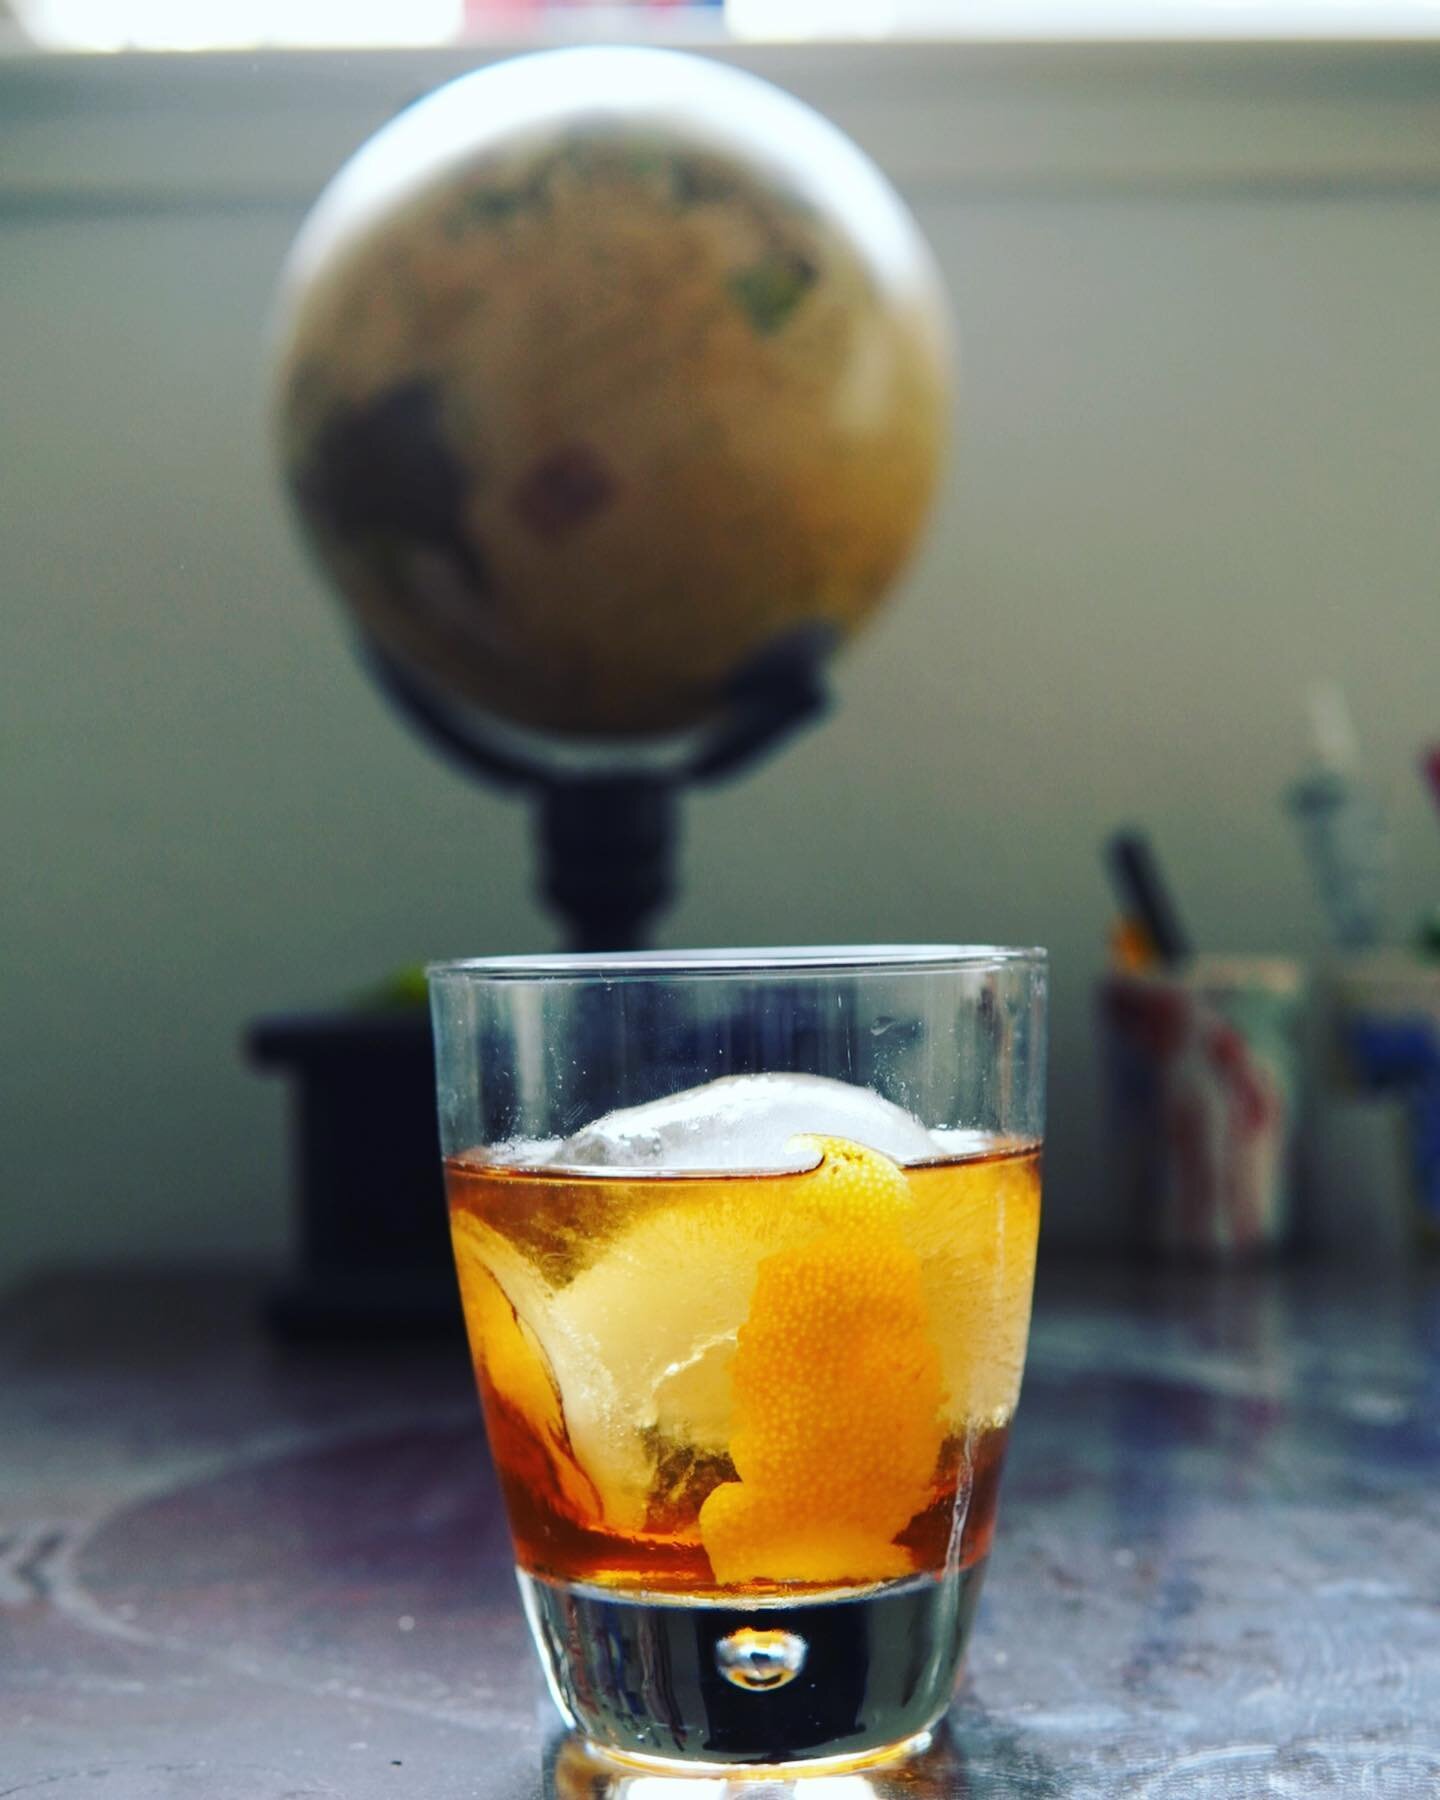 Negroni Week y&rsquo;all! Started in 2013 by @imbibe, Negroni Week started with just over 100 bars across North America to raise money for different charities. According to Imbibe, 120 participating venues has now grown to more than 12,000 venues and